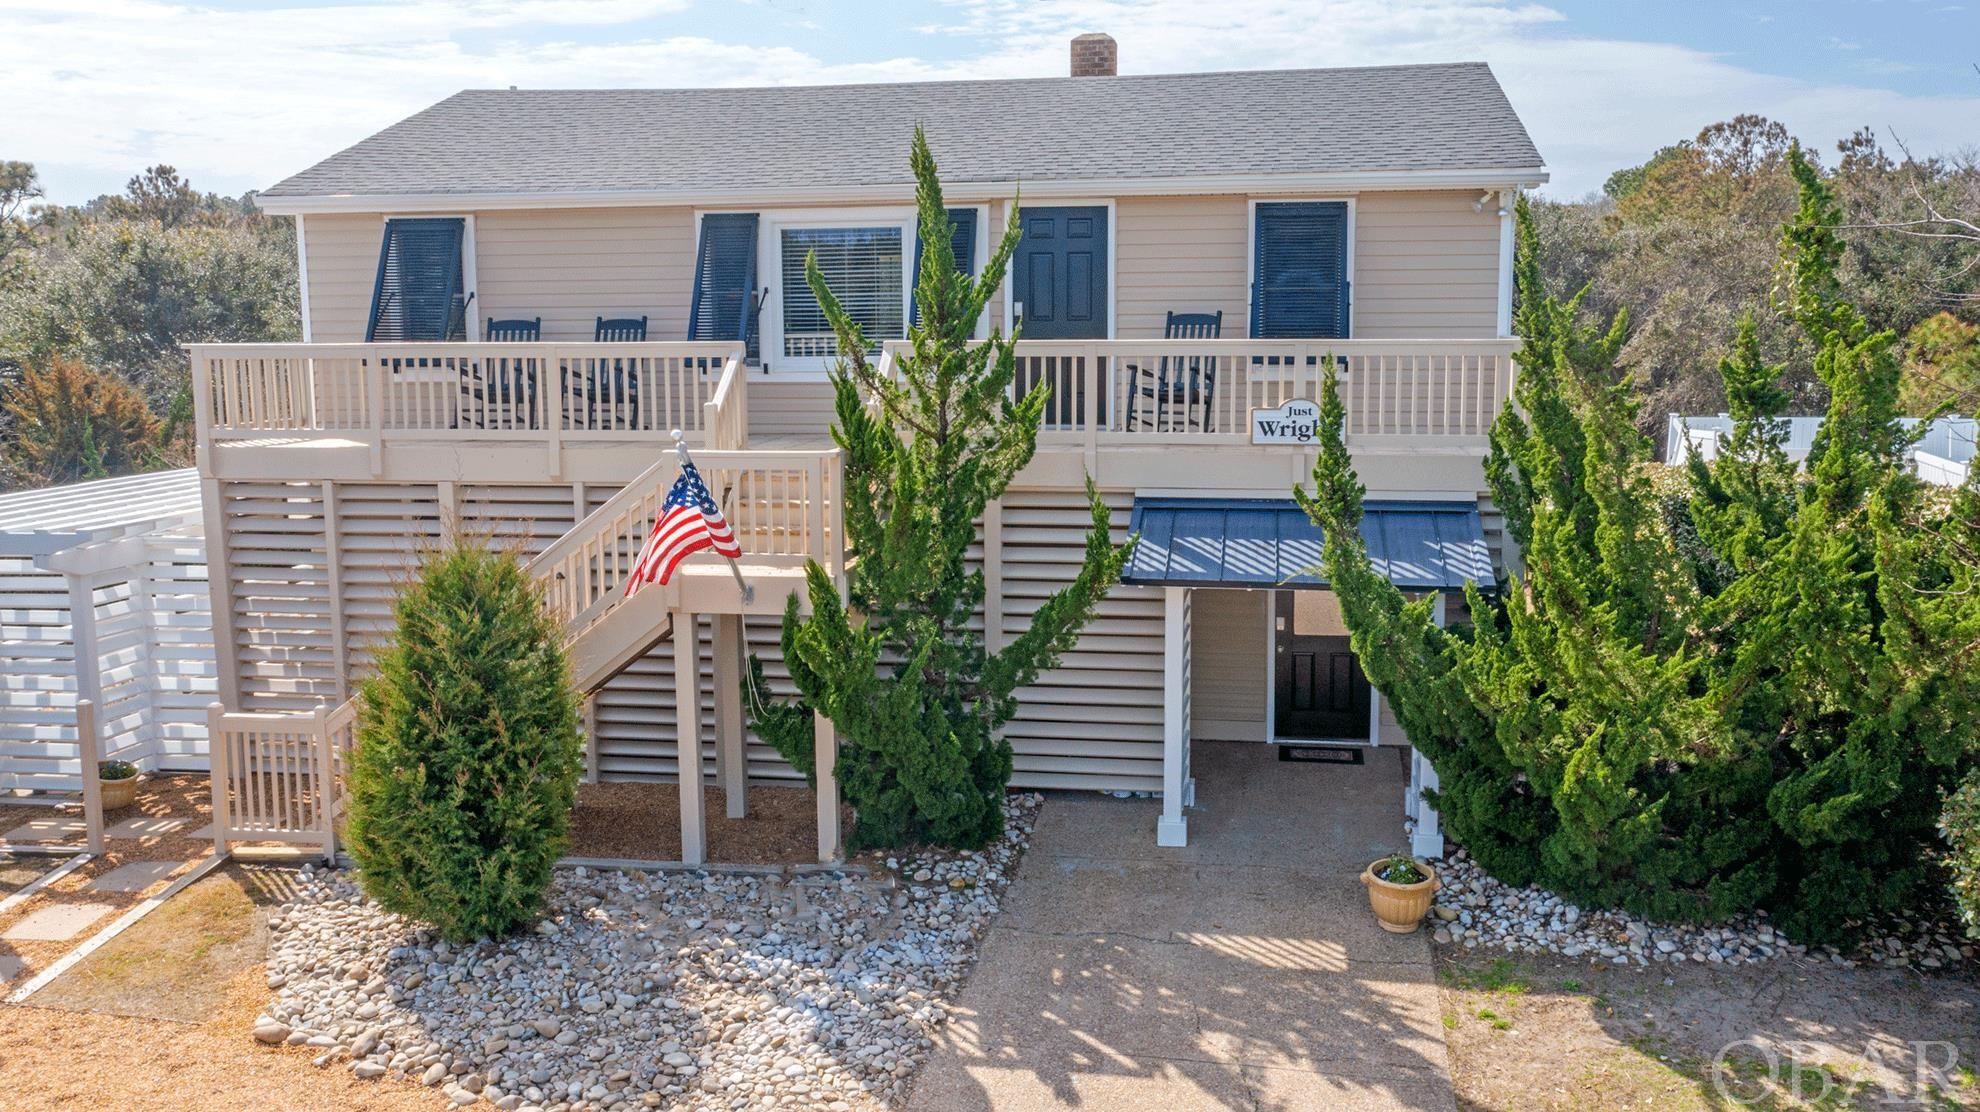 DIRECT BEACH ACCESS across the street. Classic beauty on a 32' high dune ridge in the quaint town of Southern Shores. Property has been immaculately kept and meticulously maintained as a primary residence and has been used for a multi-generational family. Could also be used as a great vacation rental or second home. Easy beach access within minutes to NC 12 crosswalk. Close to stores and restaurants by foot or take the bike path. The house offers two units one on each level. Each level has its own individual central air and heat Upstairs you have three bedrooms with living and kitchen and one bath with interior offering original tongue and grove walls and ceilings, and hardwood floors throughout, with central heat and air conditioning. The larger bedroom is located on the southeast corner, offering a roomy king size bed with new carpeting. The northeast bedroom easily fit a queen size bed and the third bedroom was used as office space. Upstairs updates include newer kitchen cabinets, counter tops,  fixtures and stainless appliances and tons of recessed lighting. Ceramic flooring in kitchen and bath, along with tasteful custom shower and builtin shelves for storage.. Lower level offers two bedrooms, kitchen, and living room with electric fireplace. The additional office space/baby room or whatever the buyer chooses it to be. Also separate laundry room. Lower updates include new cabinets, counter tops, gas range, stainless appliances and fixtures, and custom ceramic shower and tasteful fixtures. Outside improvements include custom operable storm shutters, a Pergola to enjoy from getting too much sun or to relax with a morning coffee or your favorite beverage in the evening; a detached shed with plenty of shelving and storage space; and a fenced in dog-run area for your pup and plenty of parking. Rental Projection on file.